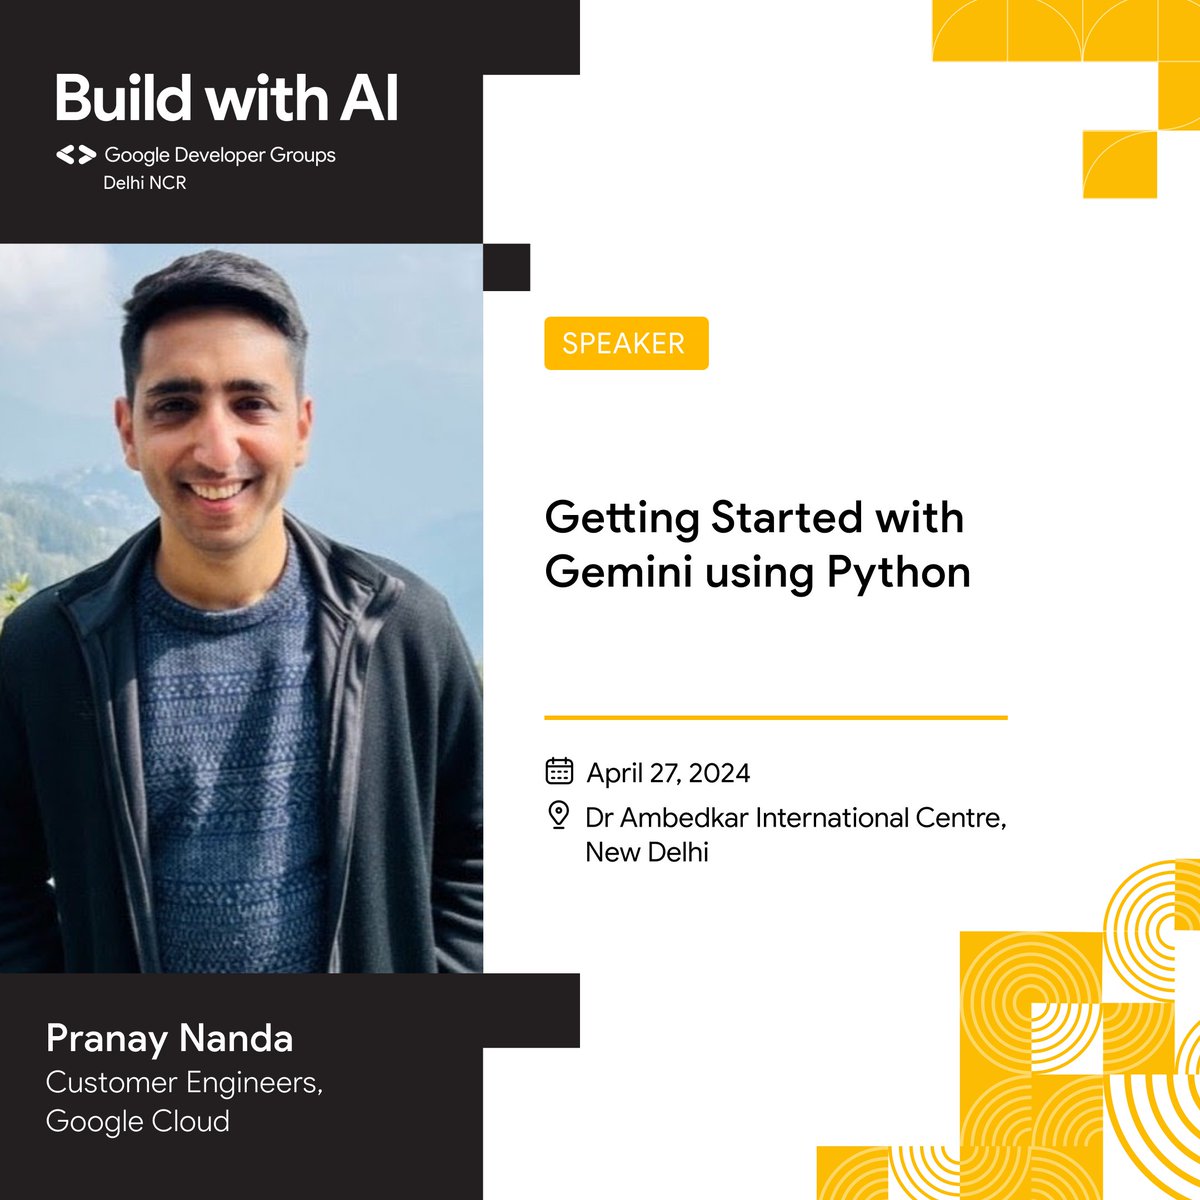 Devs, unlock the infinite with @ipranaynanda ! 🌌 The Google Cloud pro is teaching us to unleash Gemini's Generative AI power using Python. Be among the first to master this game-changing tech! 🐍🔥